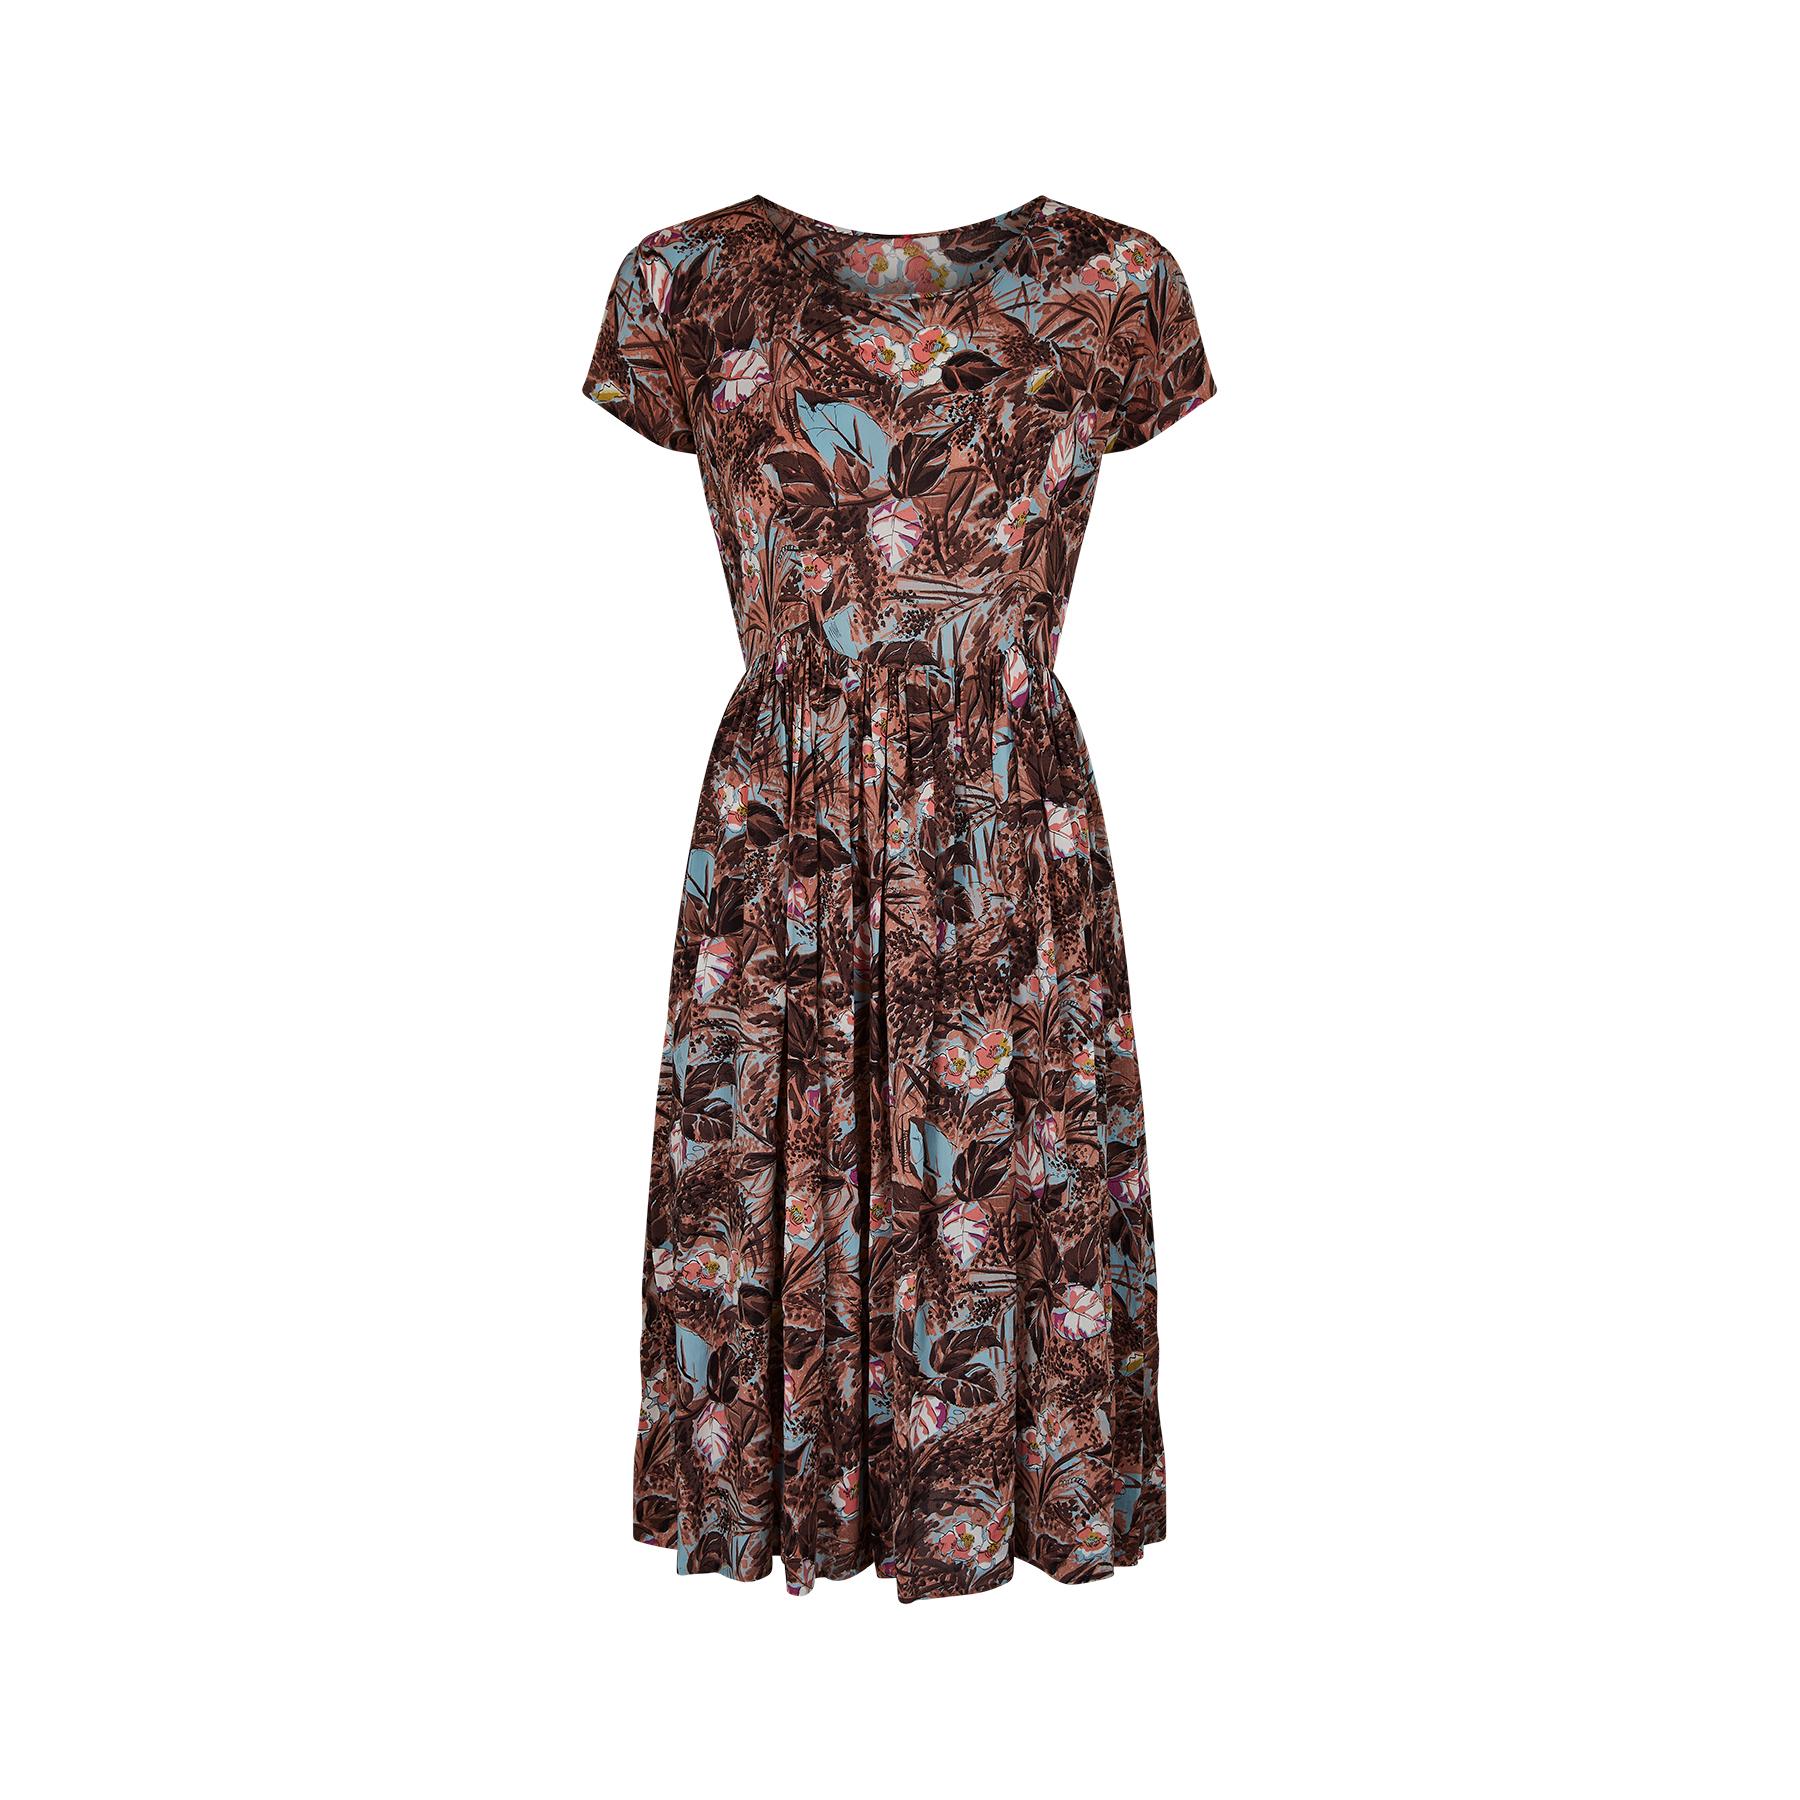 An original vintage cold rayon 1940s dress in a striking floral and leaf print.  The colour combination is a sublime contrast of pastel blue, pink and white against a dusky orange background with a painterly application of brown brush strokes which